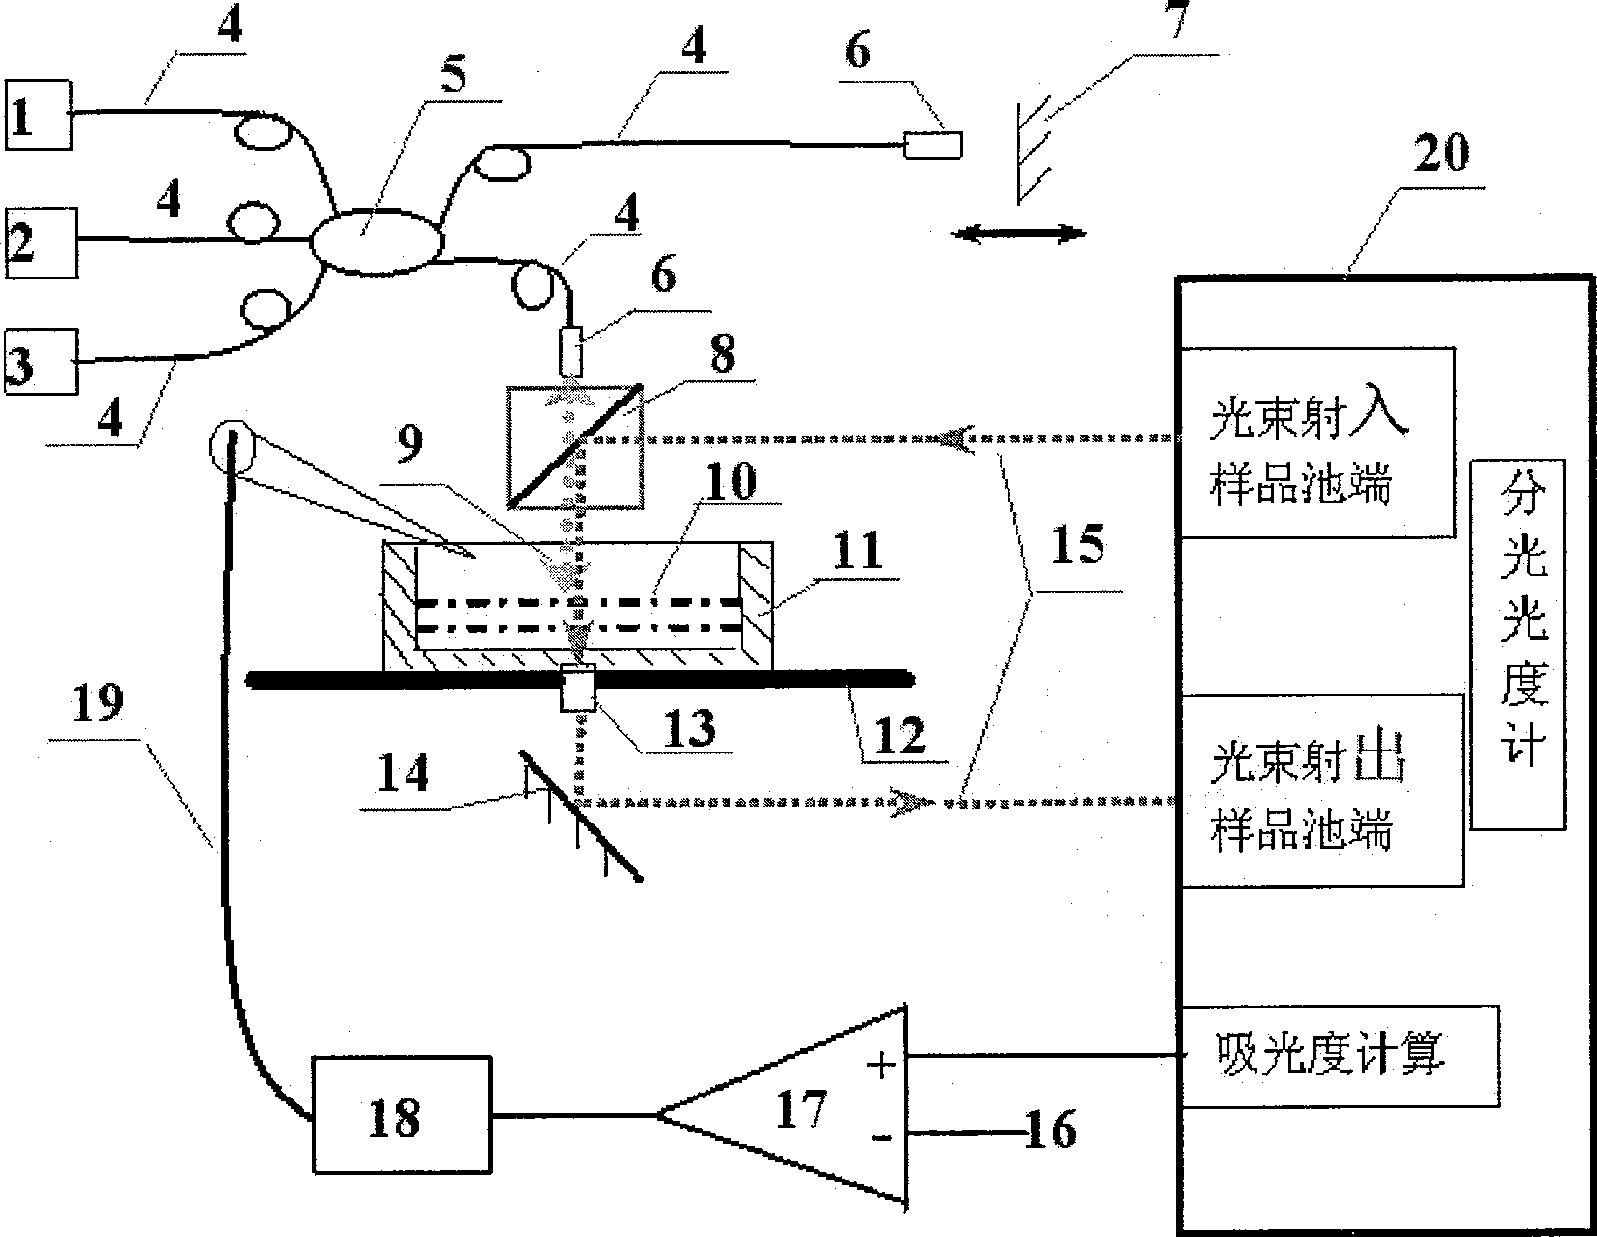 Process of applying white light interference system in measuring variable light absorbing wavelength of spectrophotometer